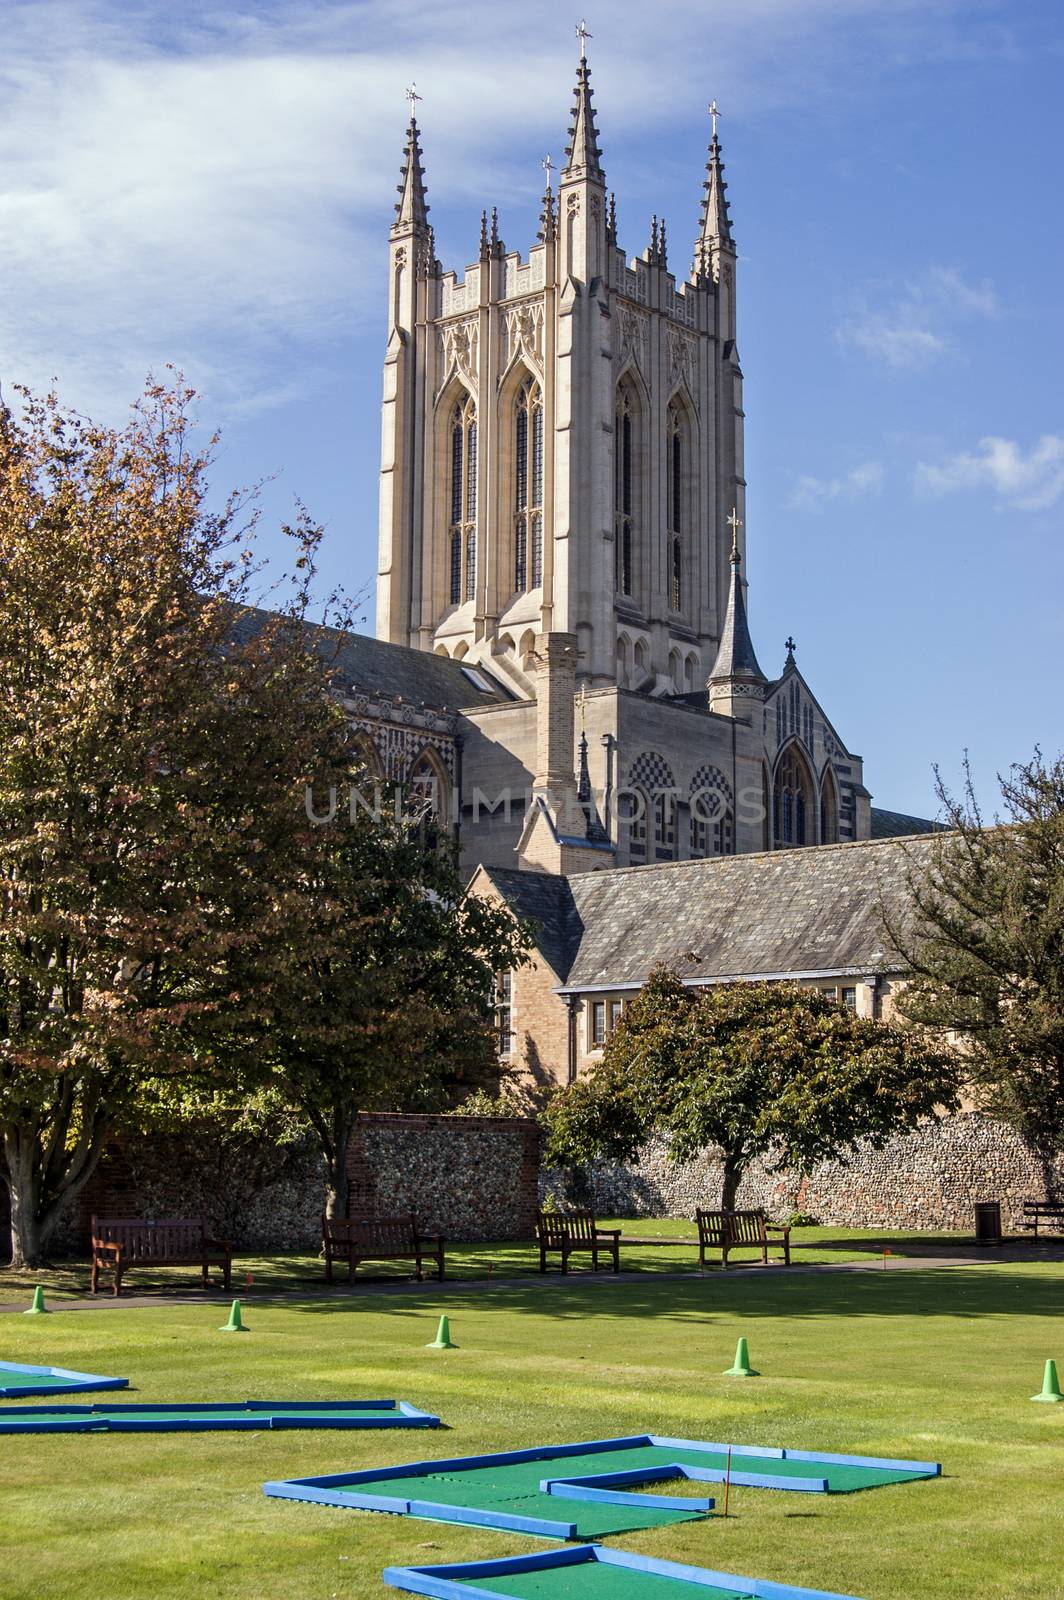 Bury St Edmunds crazy golf and Cathedral by BasPhoto